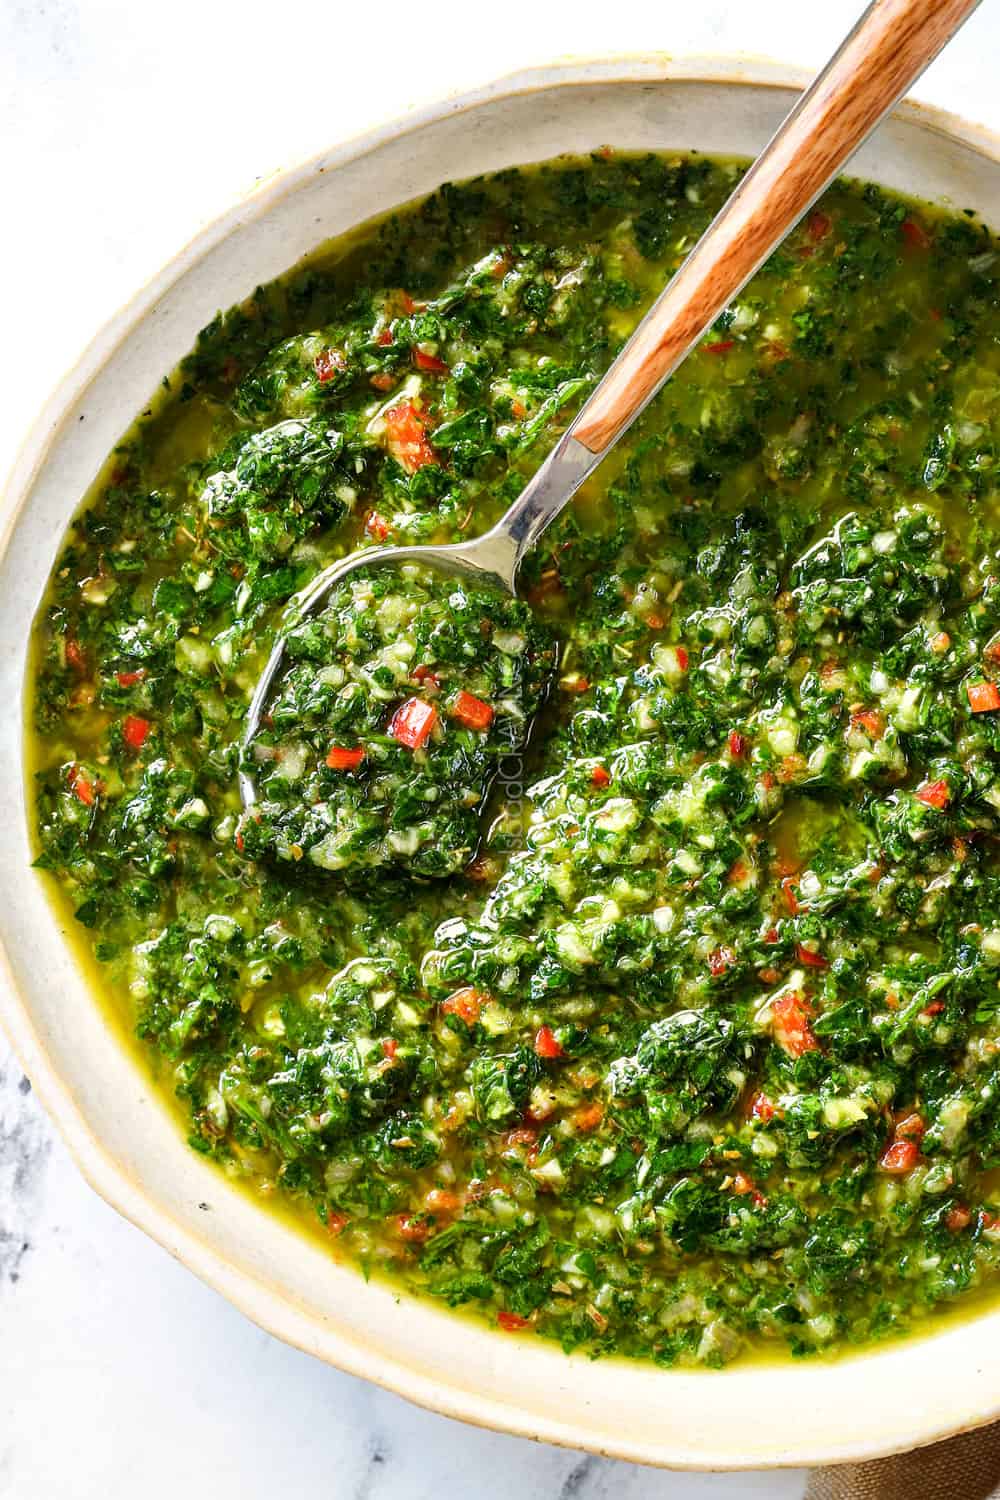 top view of the best chimichurri sauce recipe with parsley, oregano, red chili flakes, garlic and olive oil